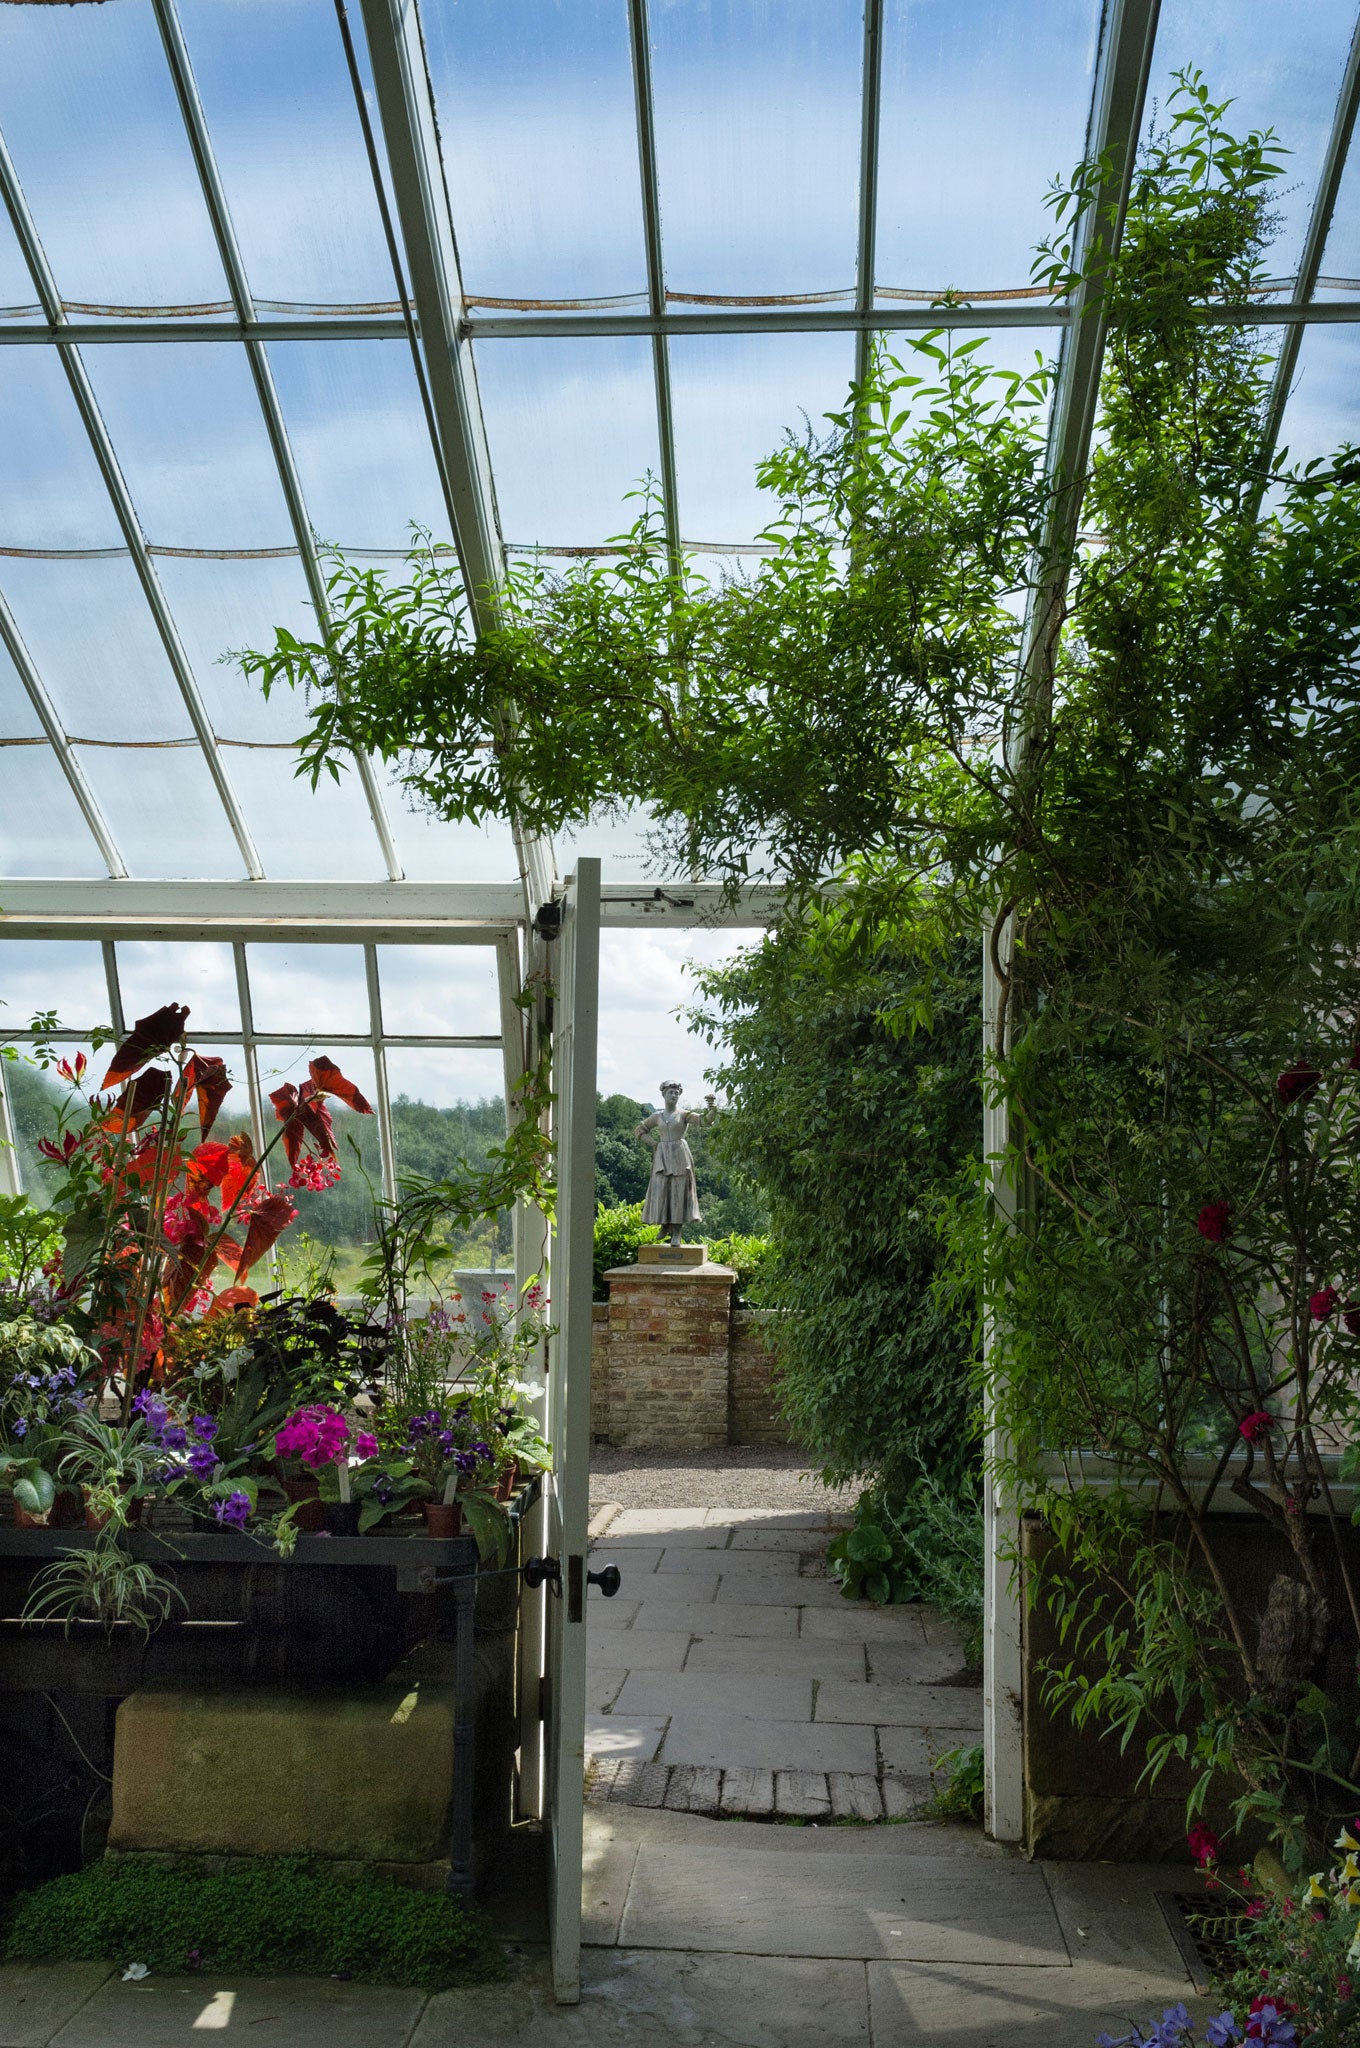 The lean-to conservatory at Wallington